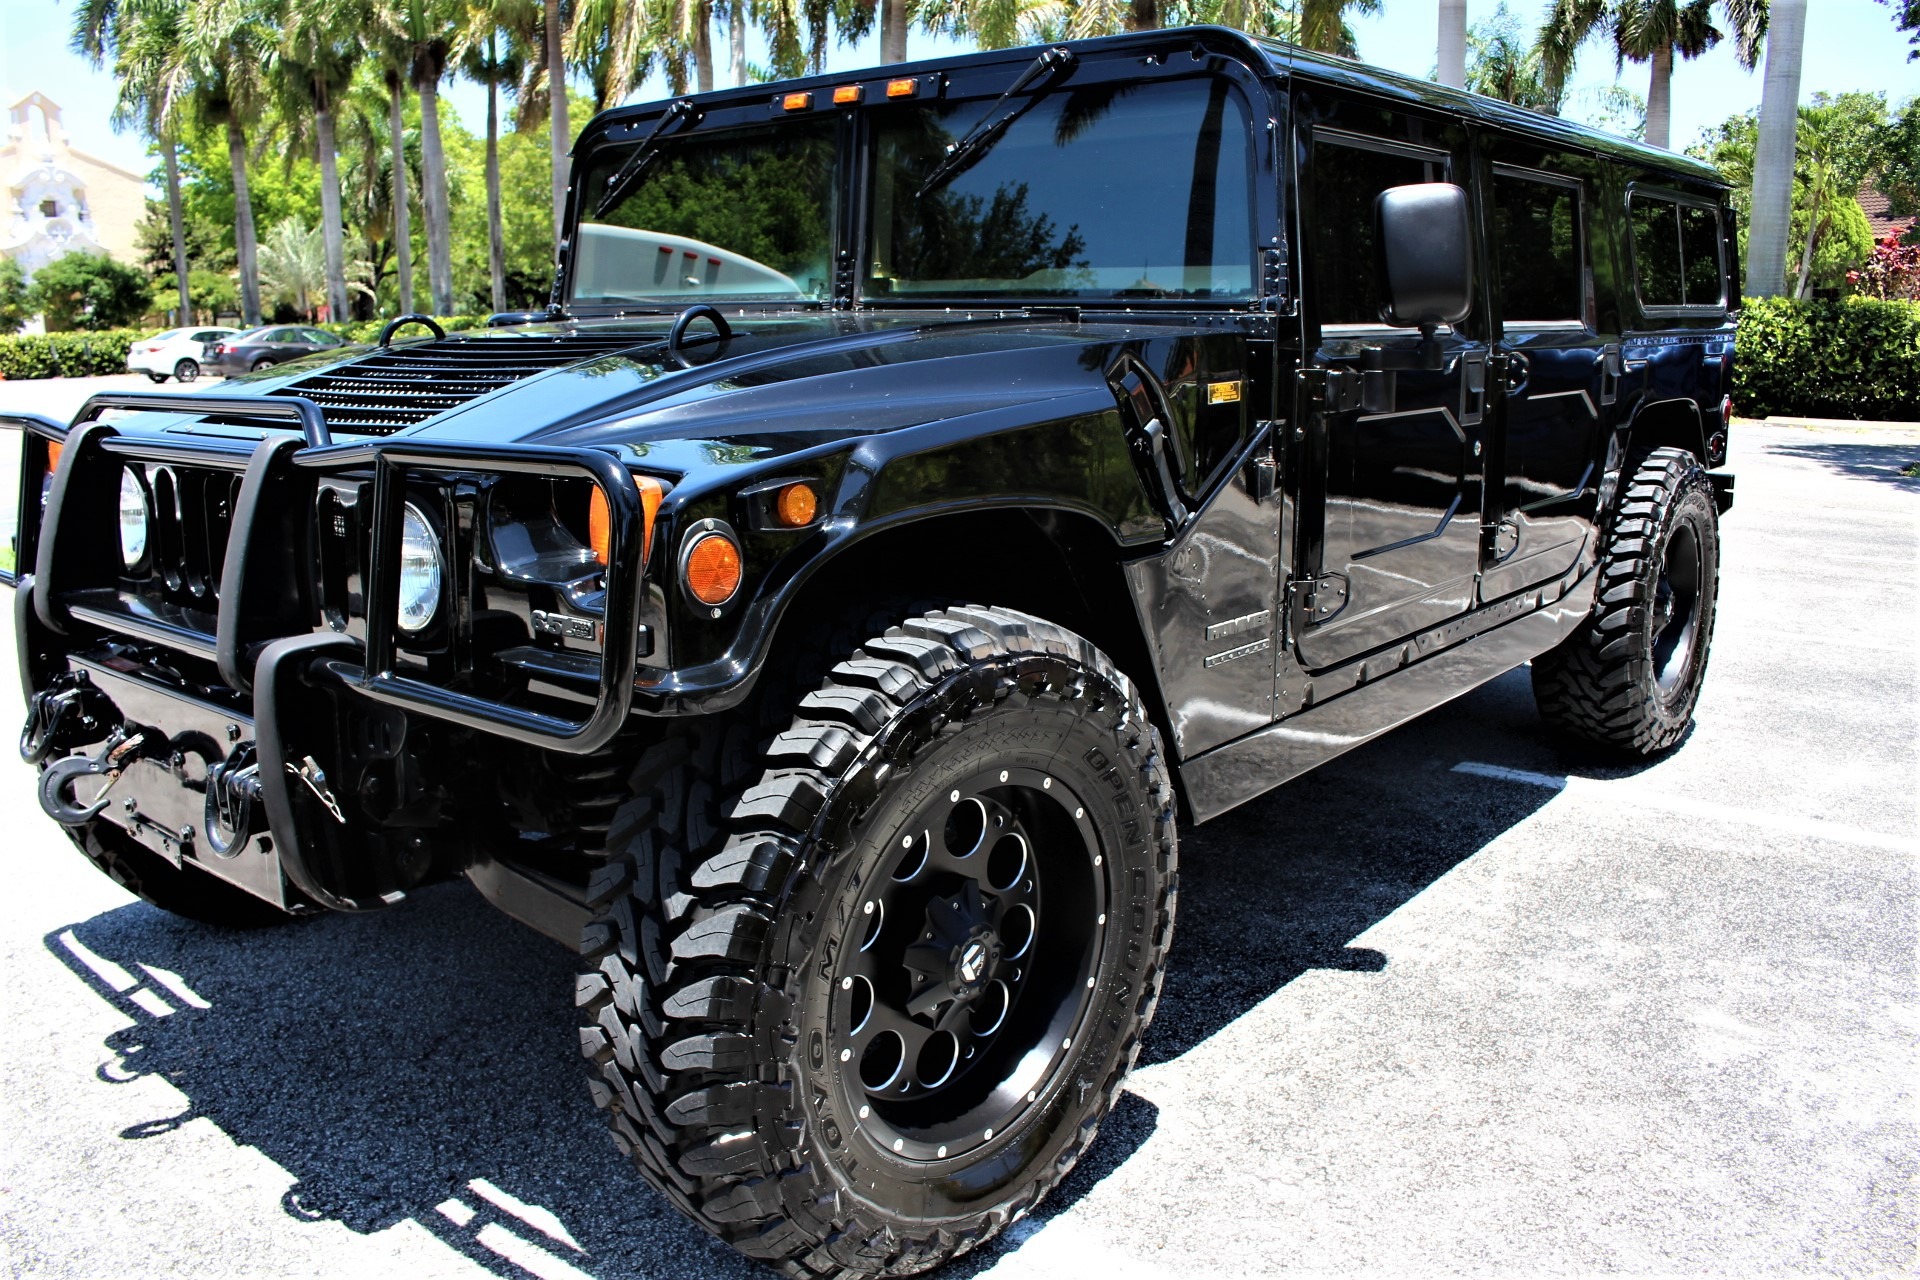 Used 2000 AM General Hummer H1 for sale Sold at The Gables Sports Cars in Miami FL 33146 3